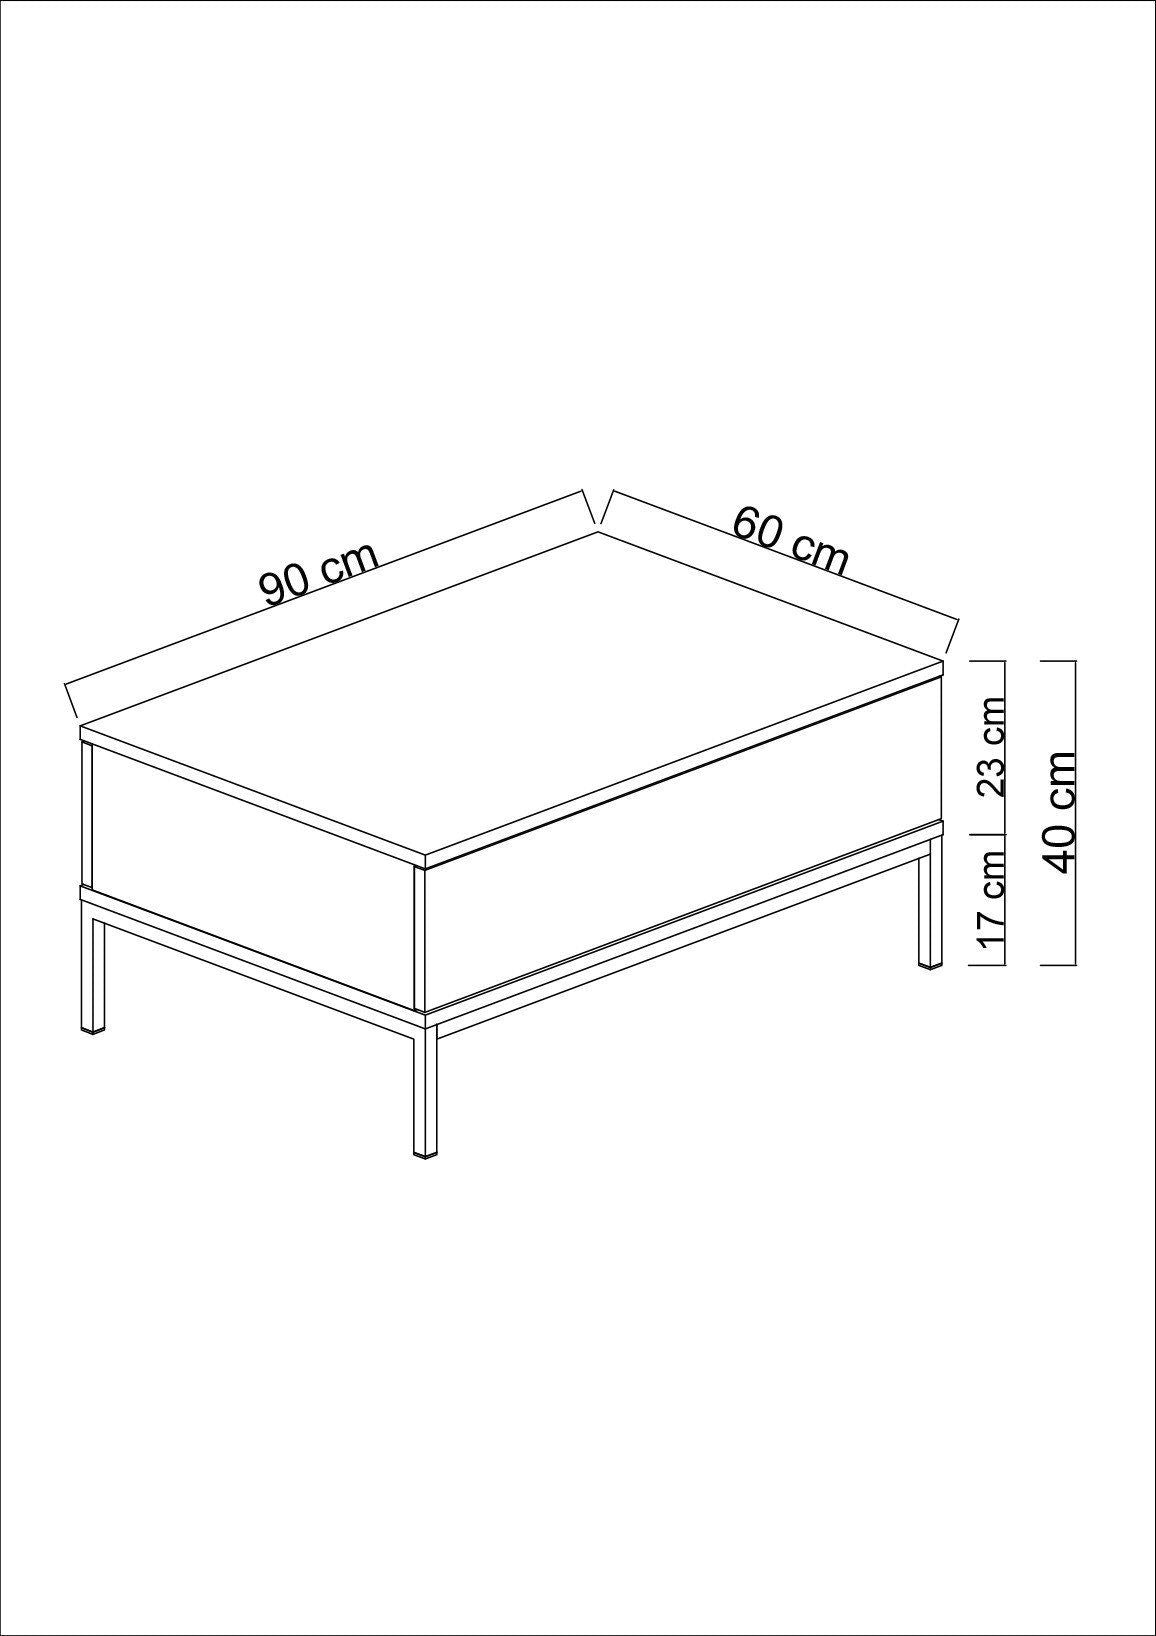 Lord - White, Silver - Coffee Table